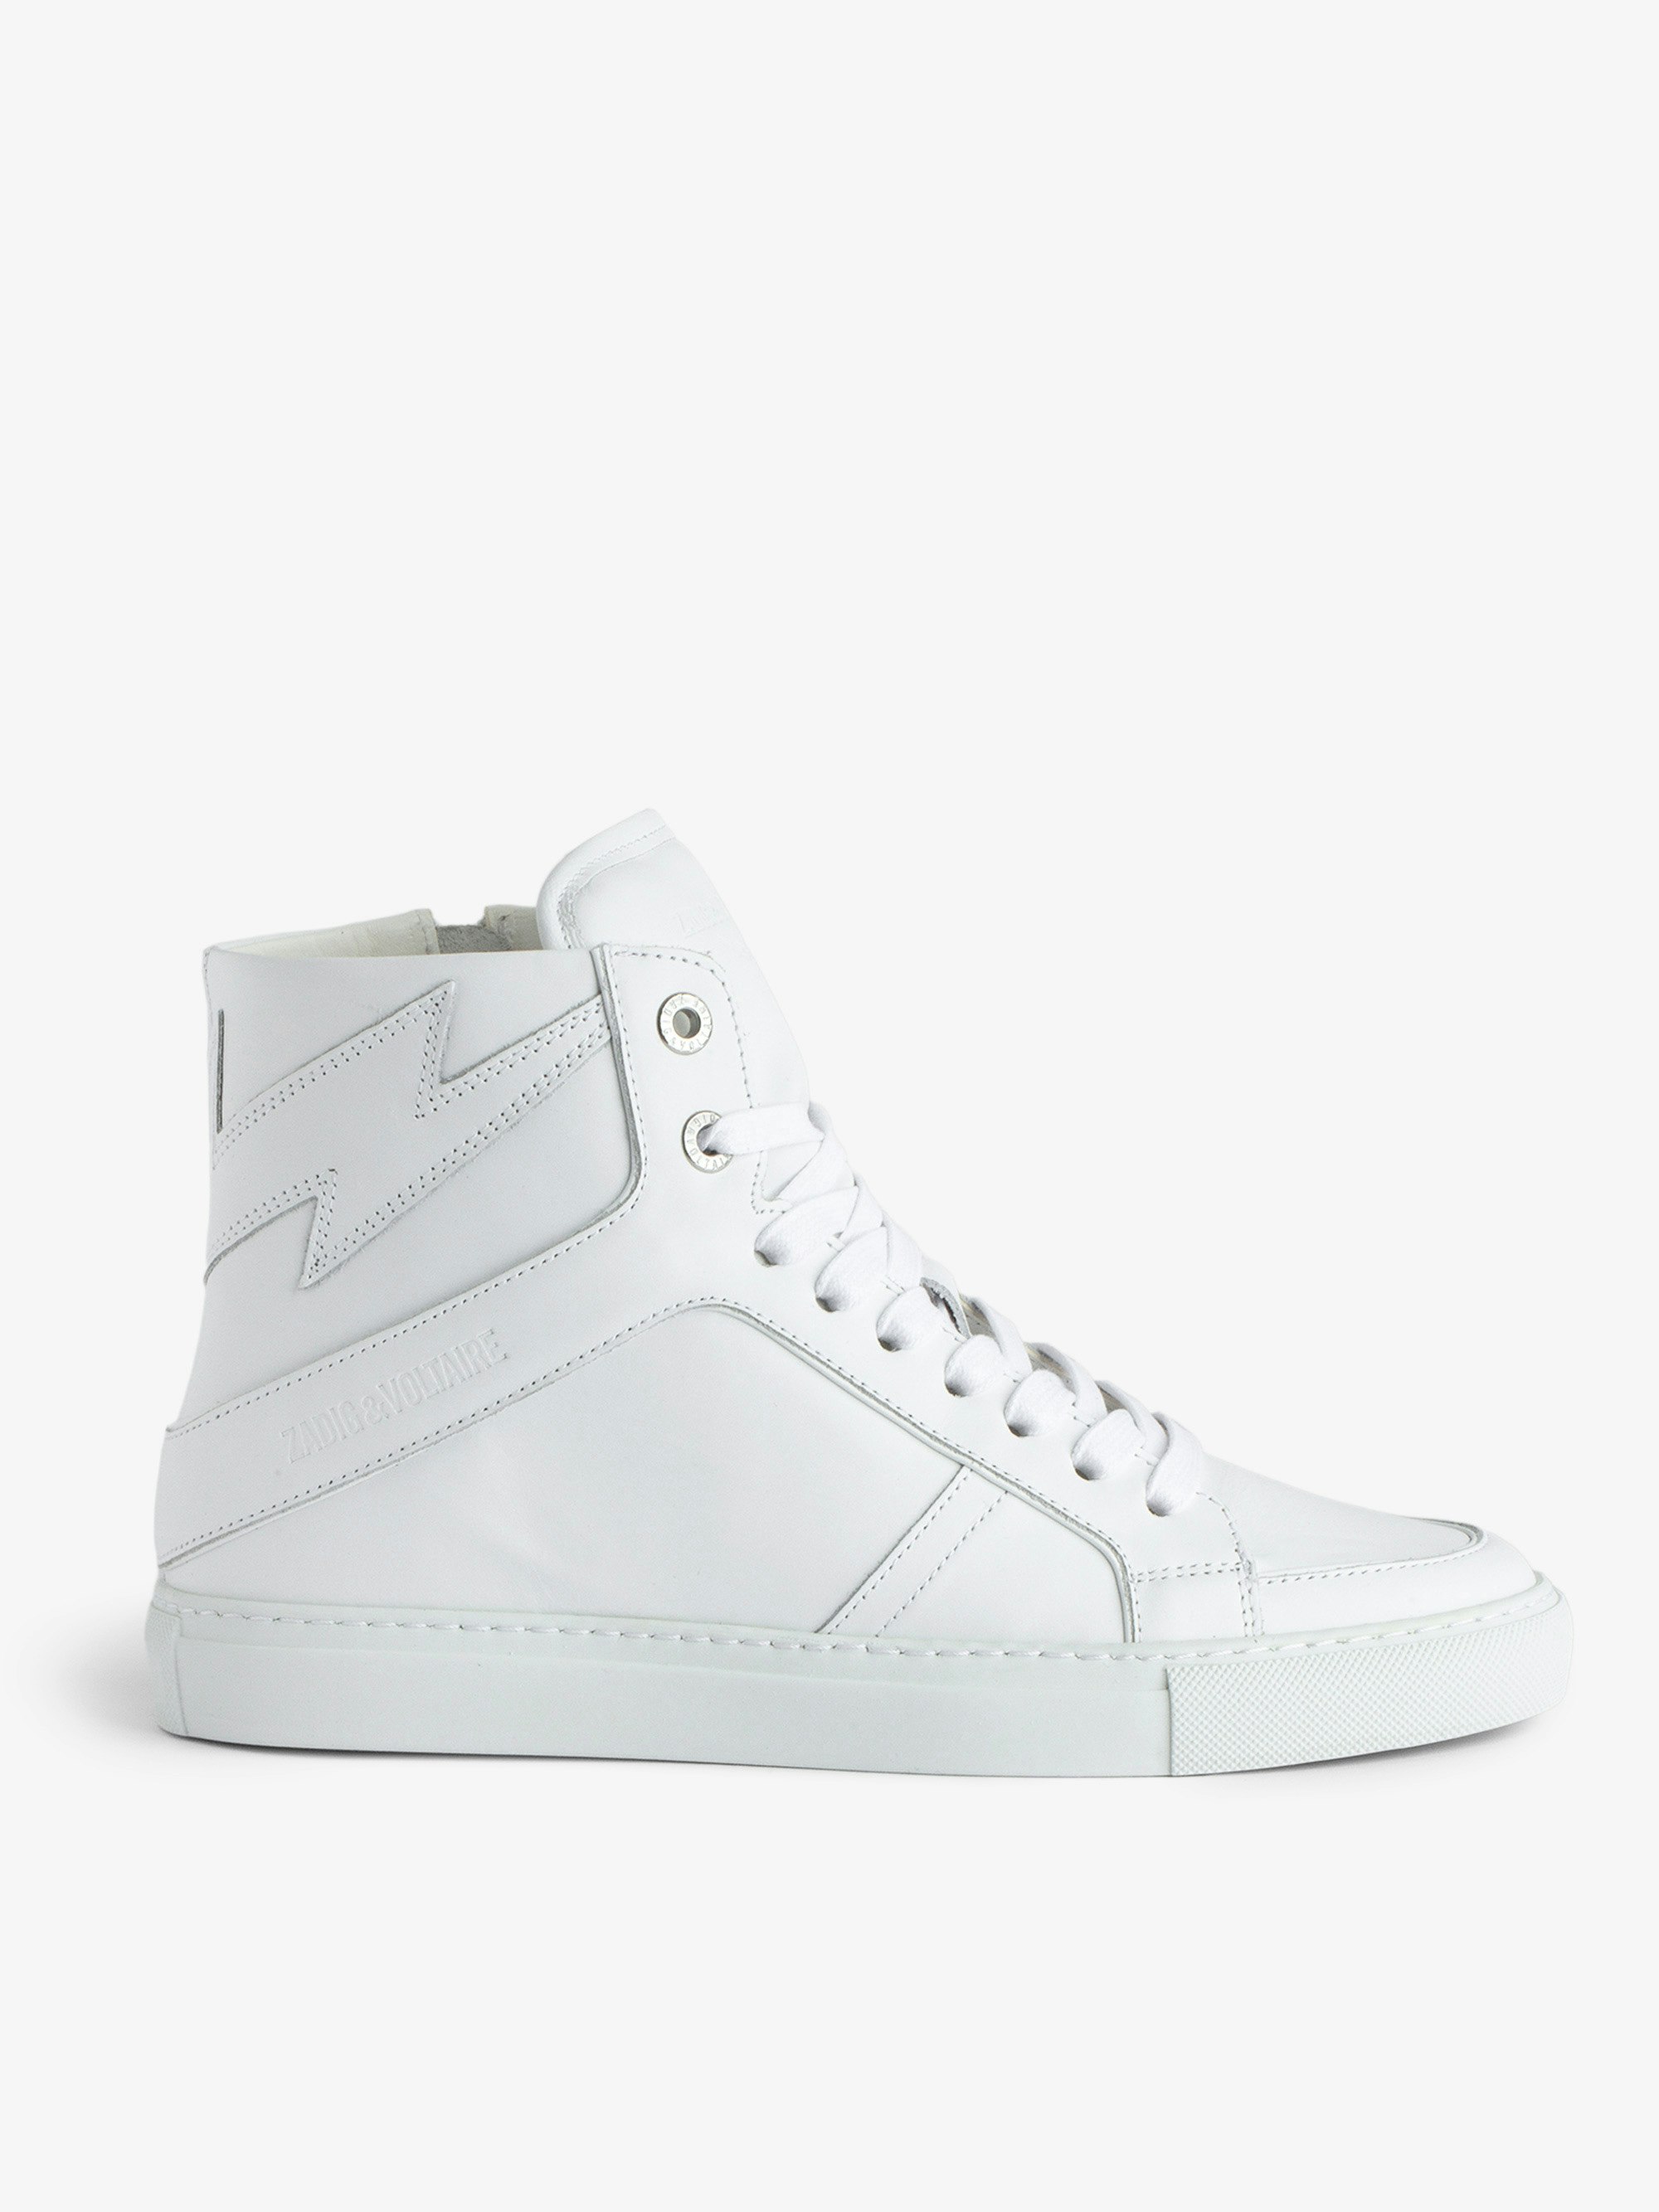 ZV1747 High Flash sneakers - Women’s white leather high-top sneakers.